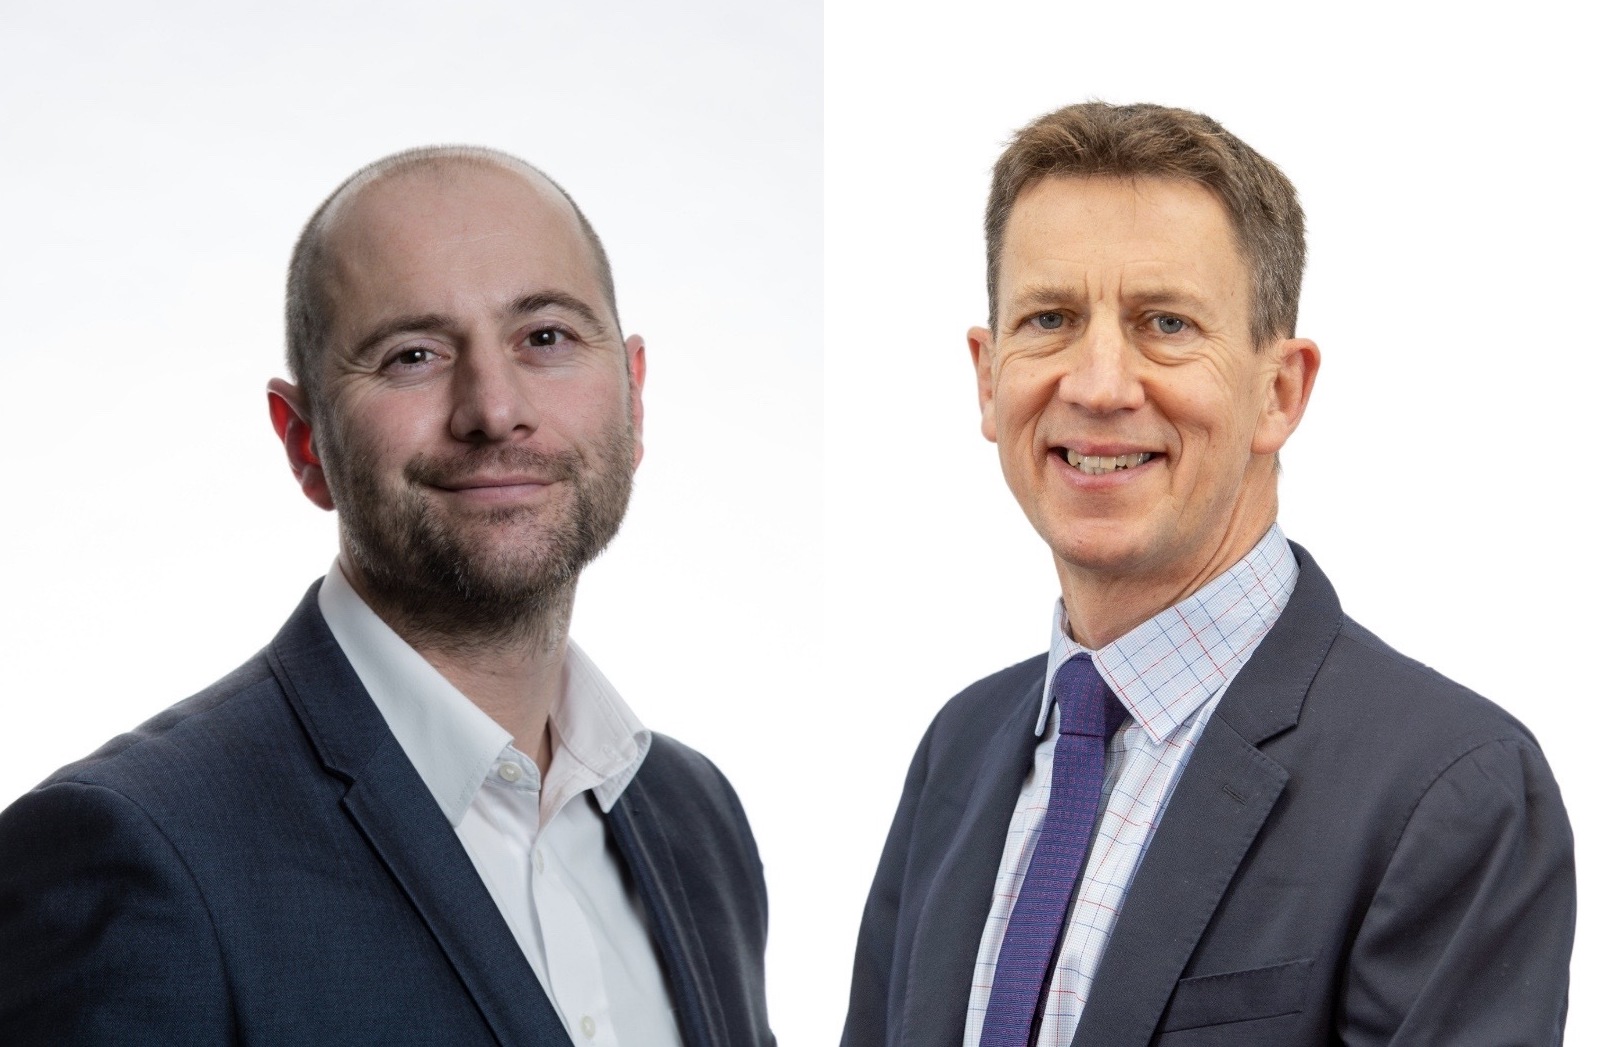 Avison Young appoints regional MDs for Glasgow and Edinburgh